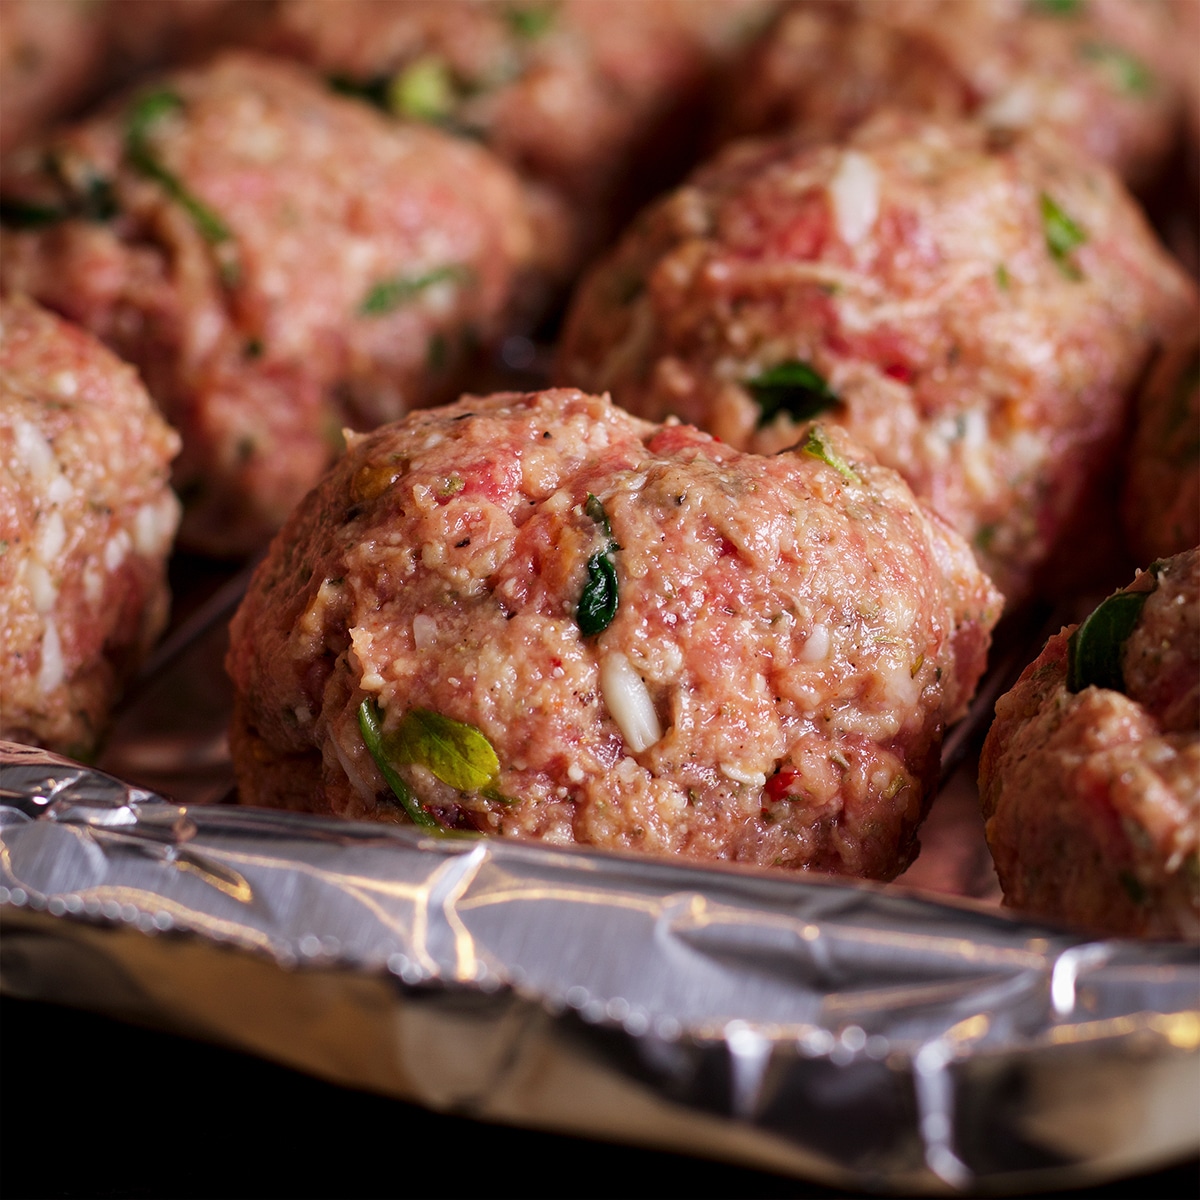 A broiling pan lined with foil containing raw Italian meatballs ready to go under the broiler to cook.